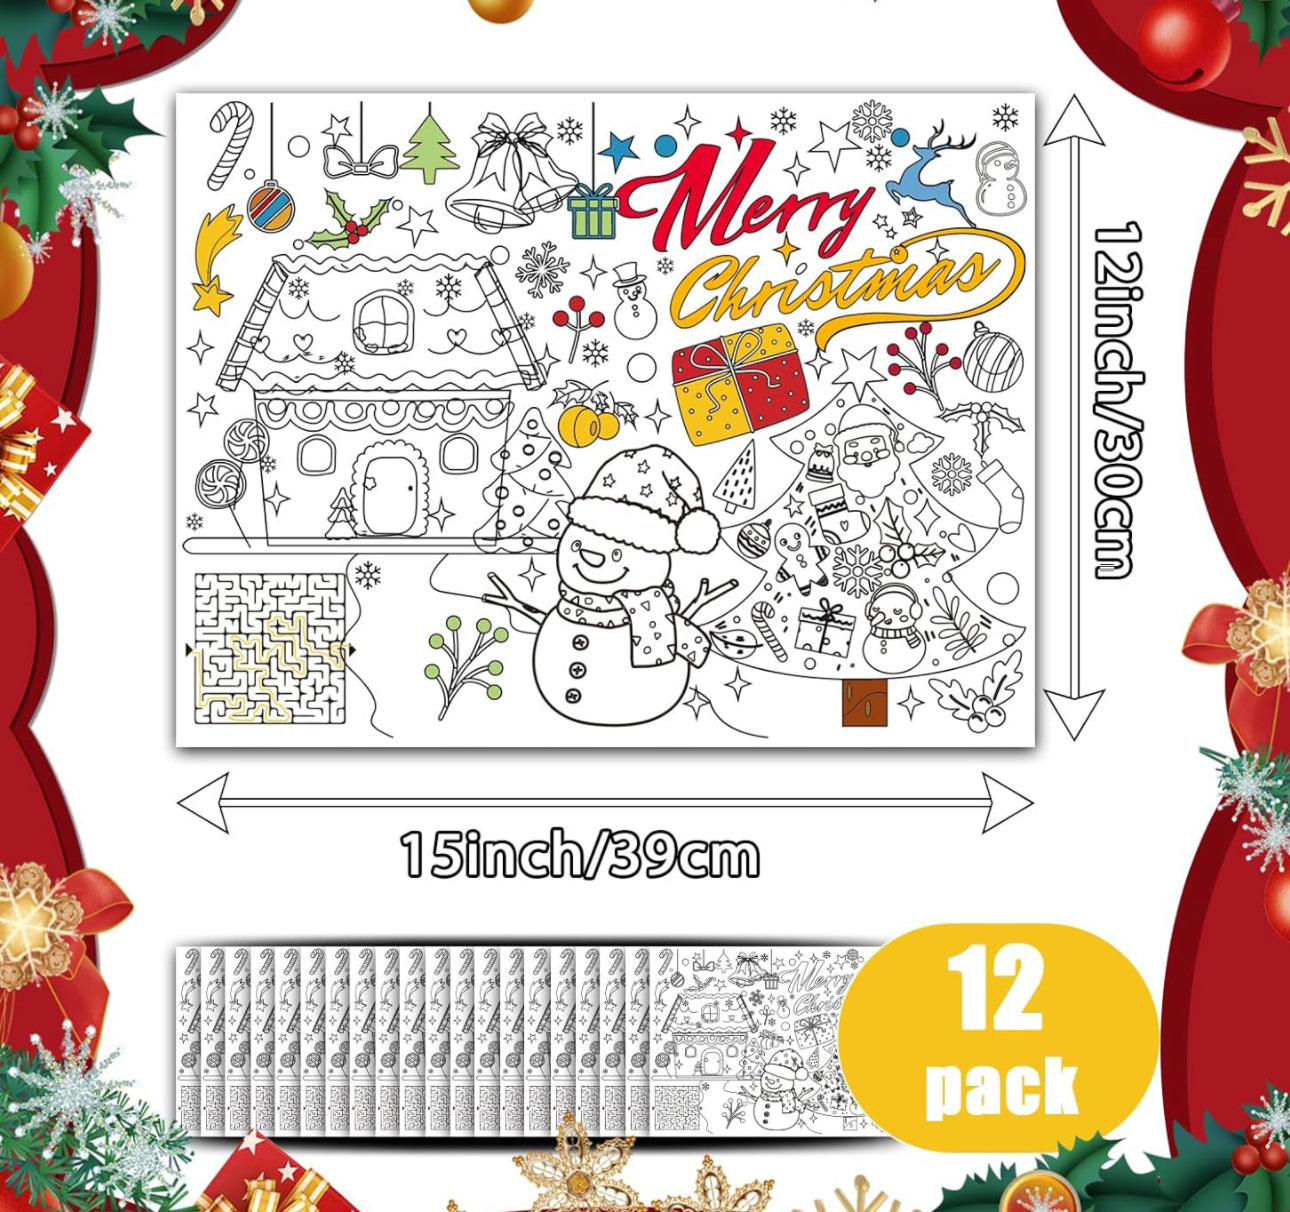 12 Pcs Christmas Placemats Paper Place Mats Disposable Christmas Coloring Placemats for Party School Christmas Supplies Disposable Placemats